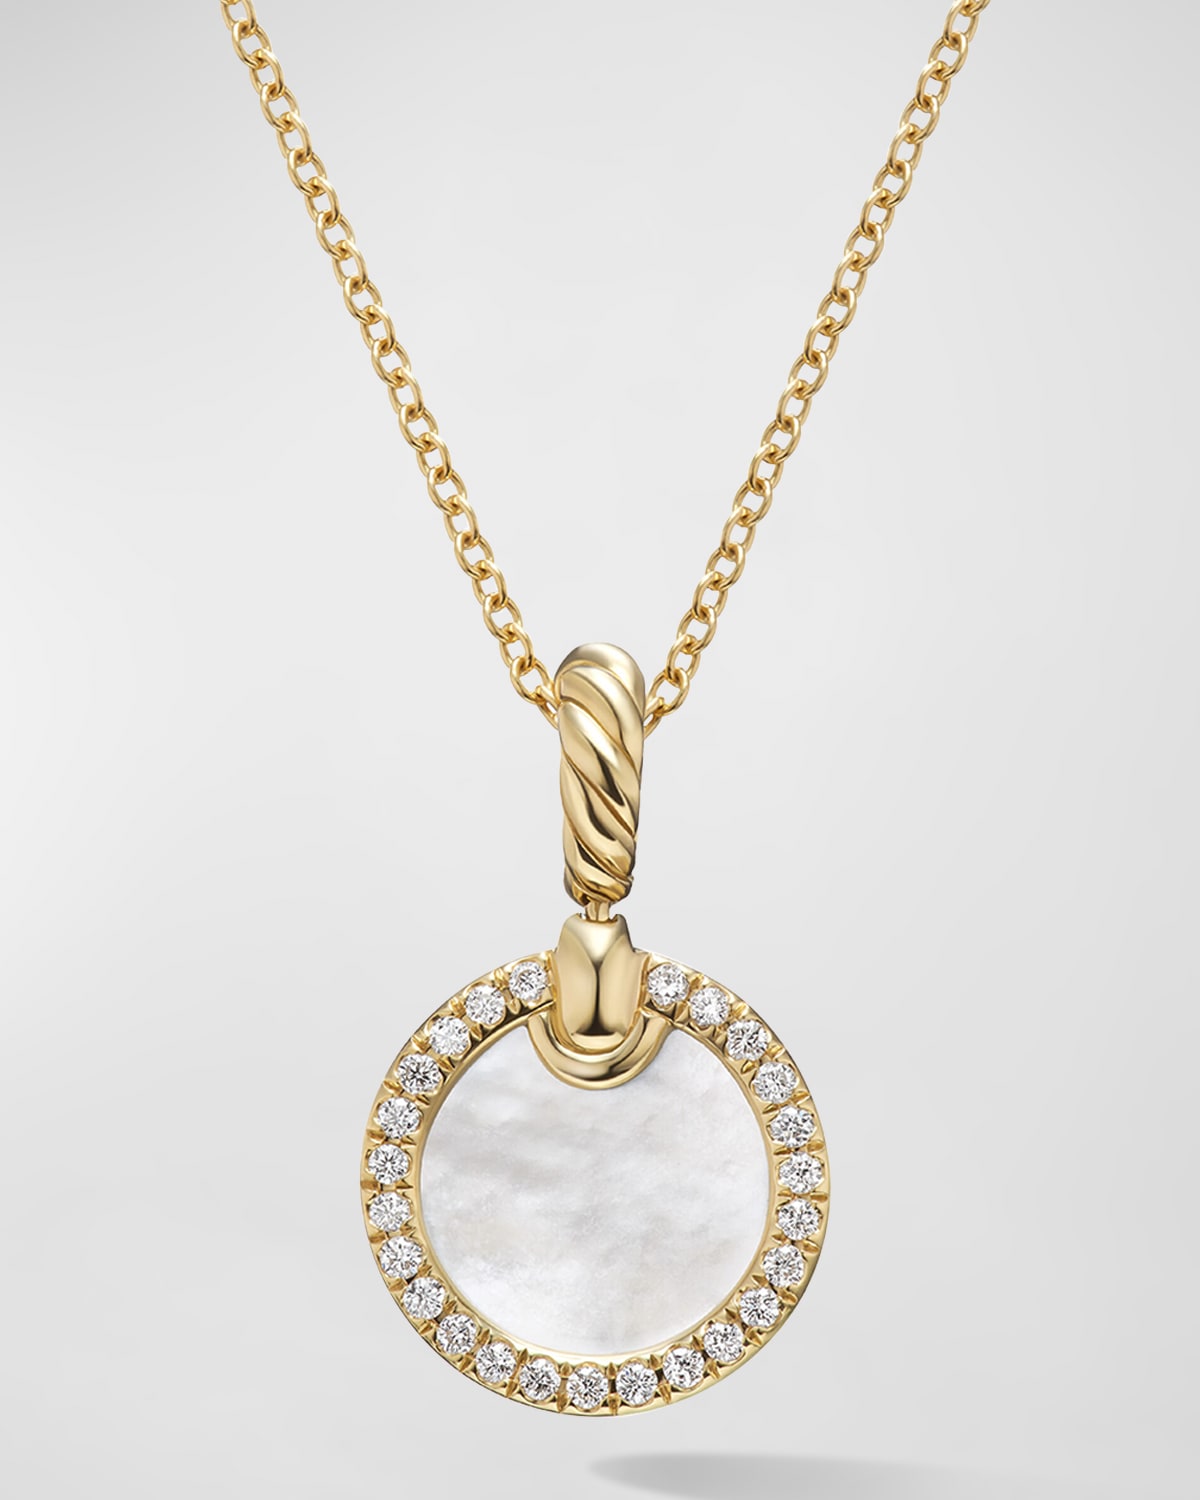 DAVID YURMAN DY ELEMENTS PENDANT NECKLACE WITH GEMSTONE AND DIAMONDS IN 18K GOLD, 17.8MM, 16-18"L